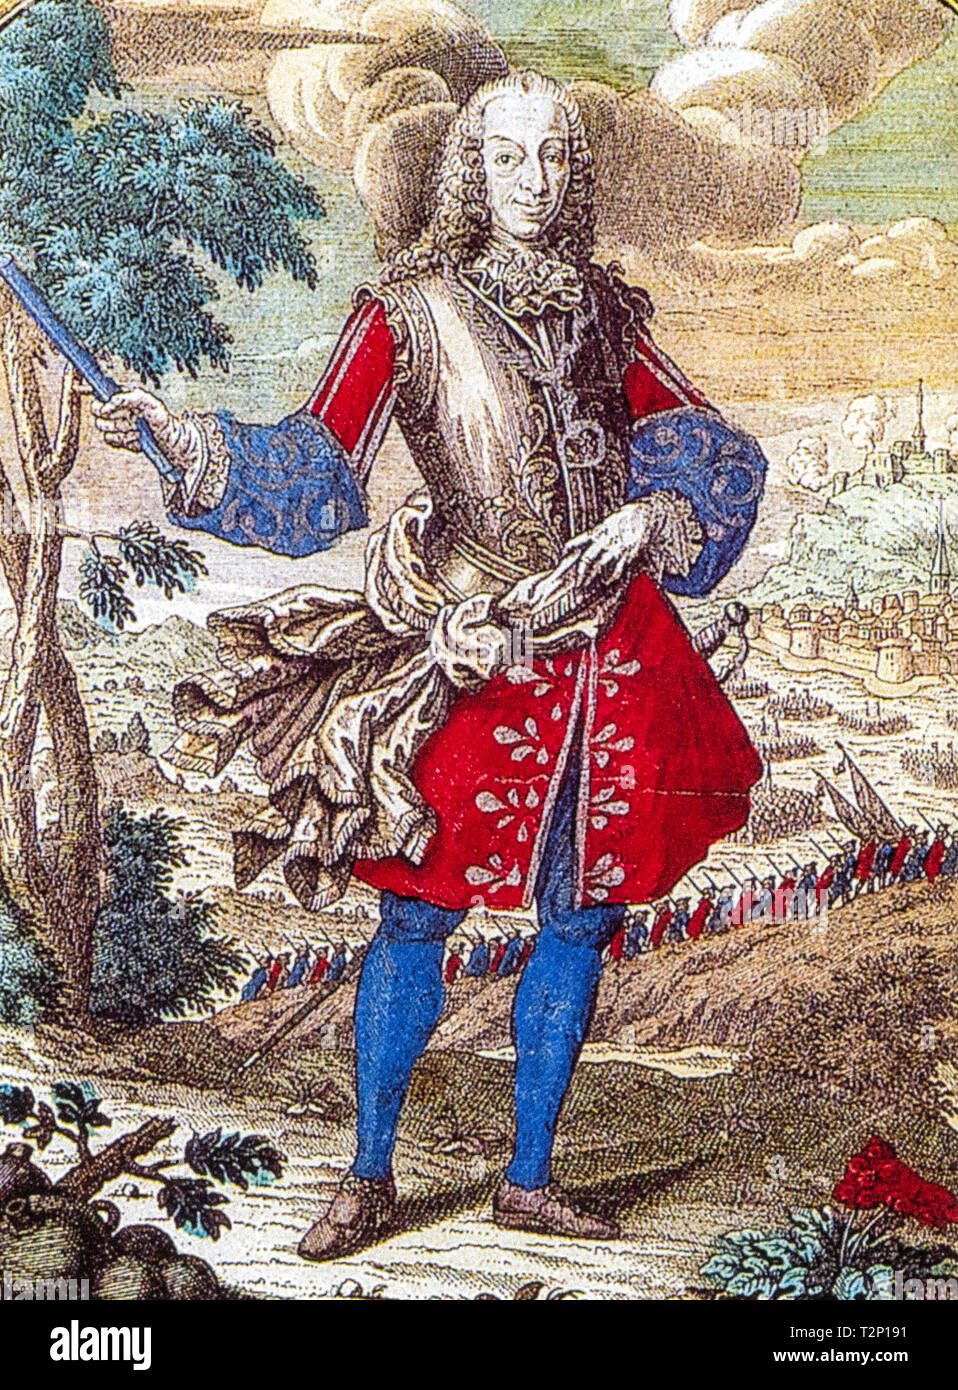 Carlo Emanuele III of Savoy - In an engraving printed by Jacques Chireau -  known as the Laborer and nicknamed by the Piedmontese Carlin (Turin, 27 April 1701 - Turin, 20 February 1773), king of Sardinia, duke of Savoy, duke of Monferrato, marquis of Saluzzo, prince of Piedmont 'Aosta, della Moriana and Nizza from 1730 to 1773. Stock Photo